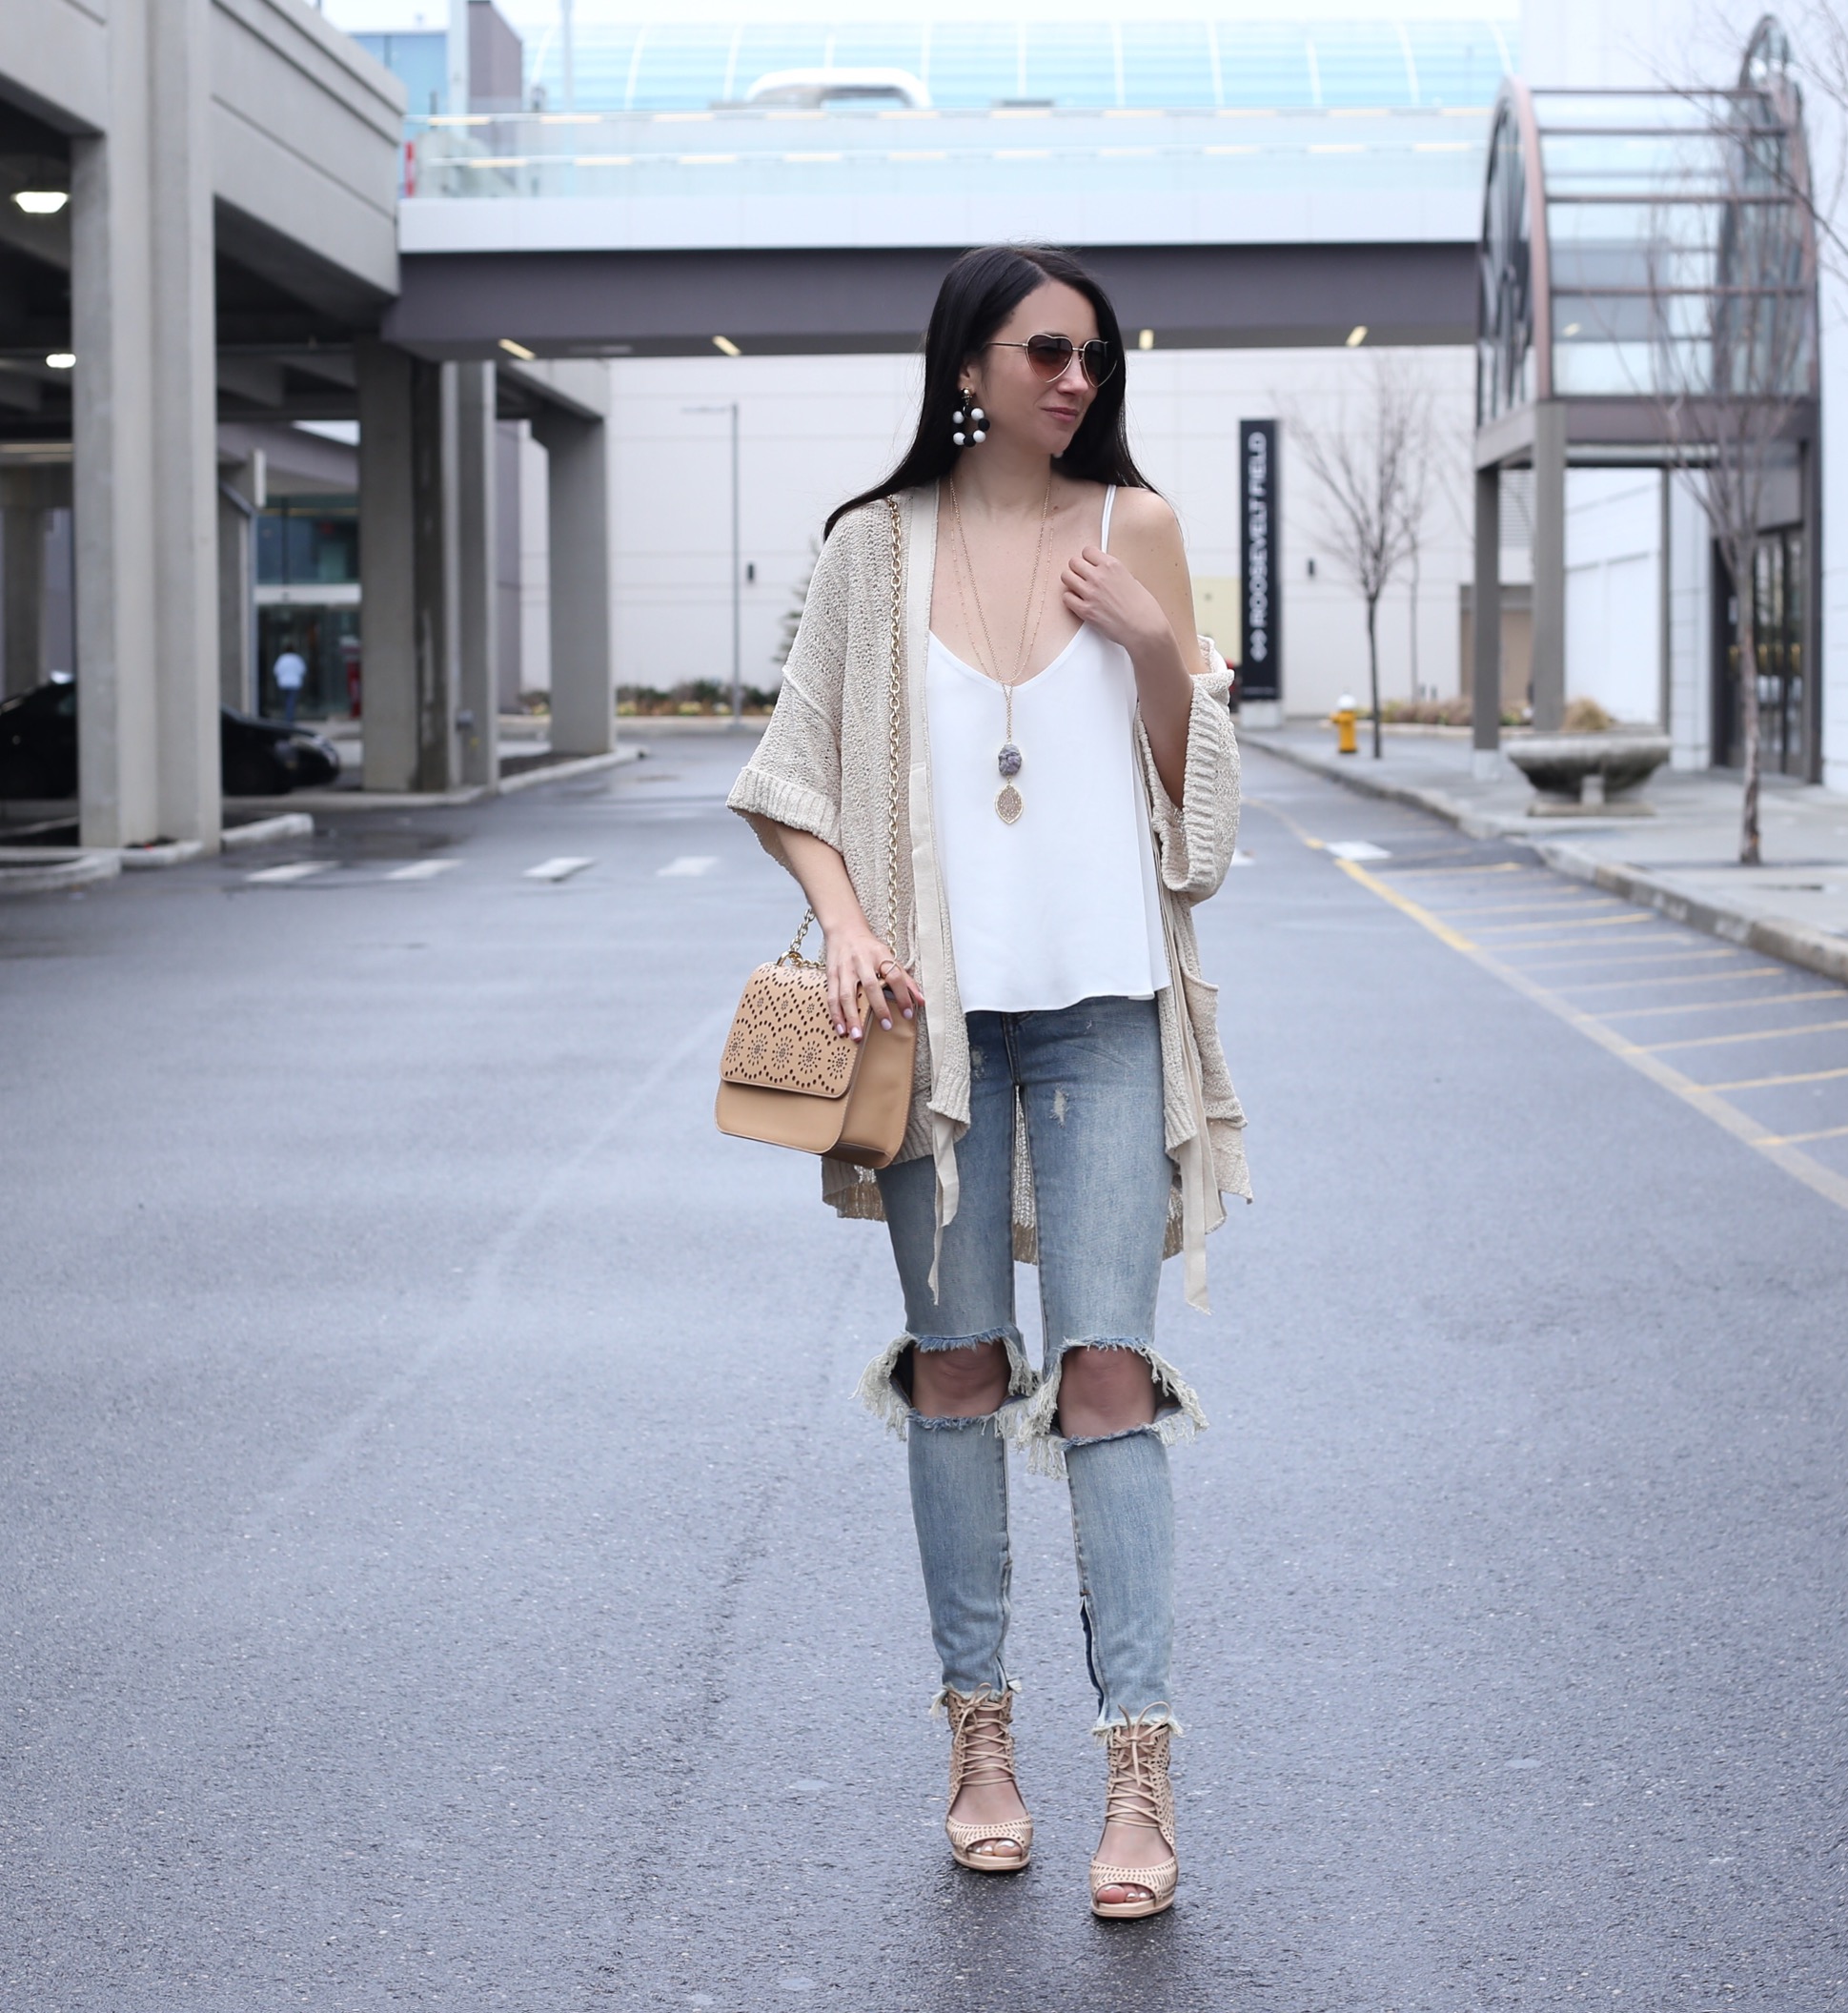 Anna Monterio fashion blogger of blushing rose style wearing spring fashion accessories from Nordstrom